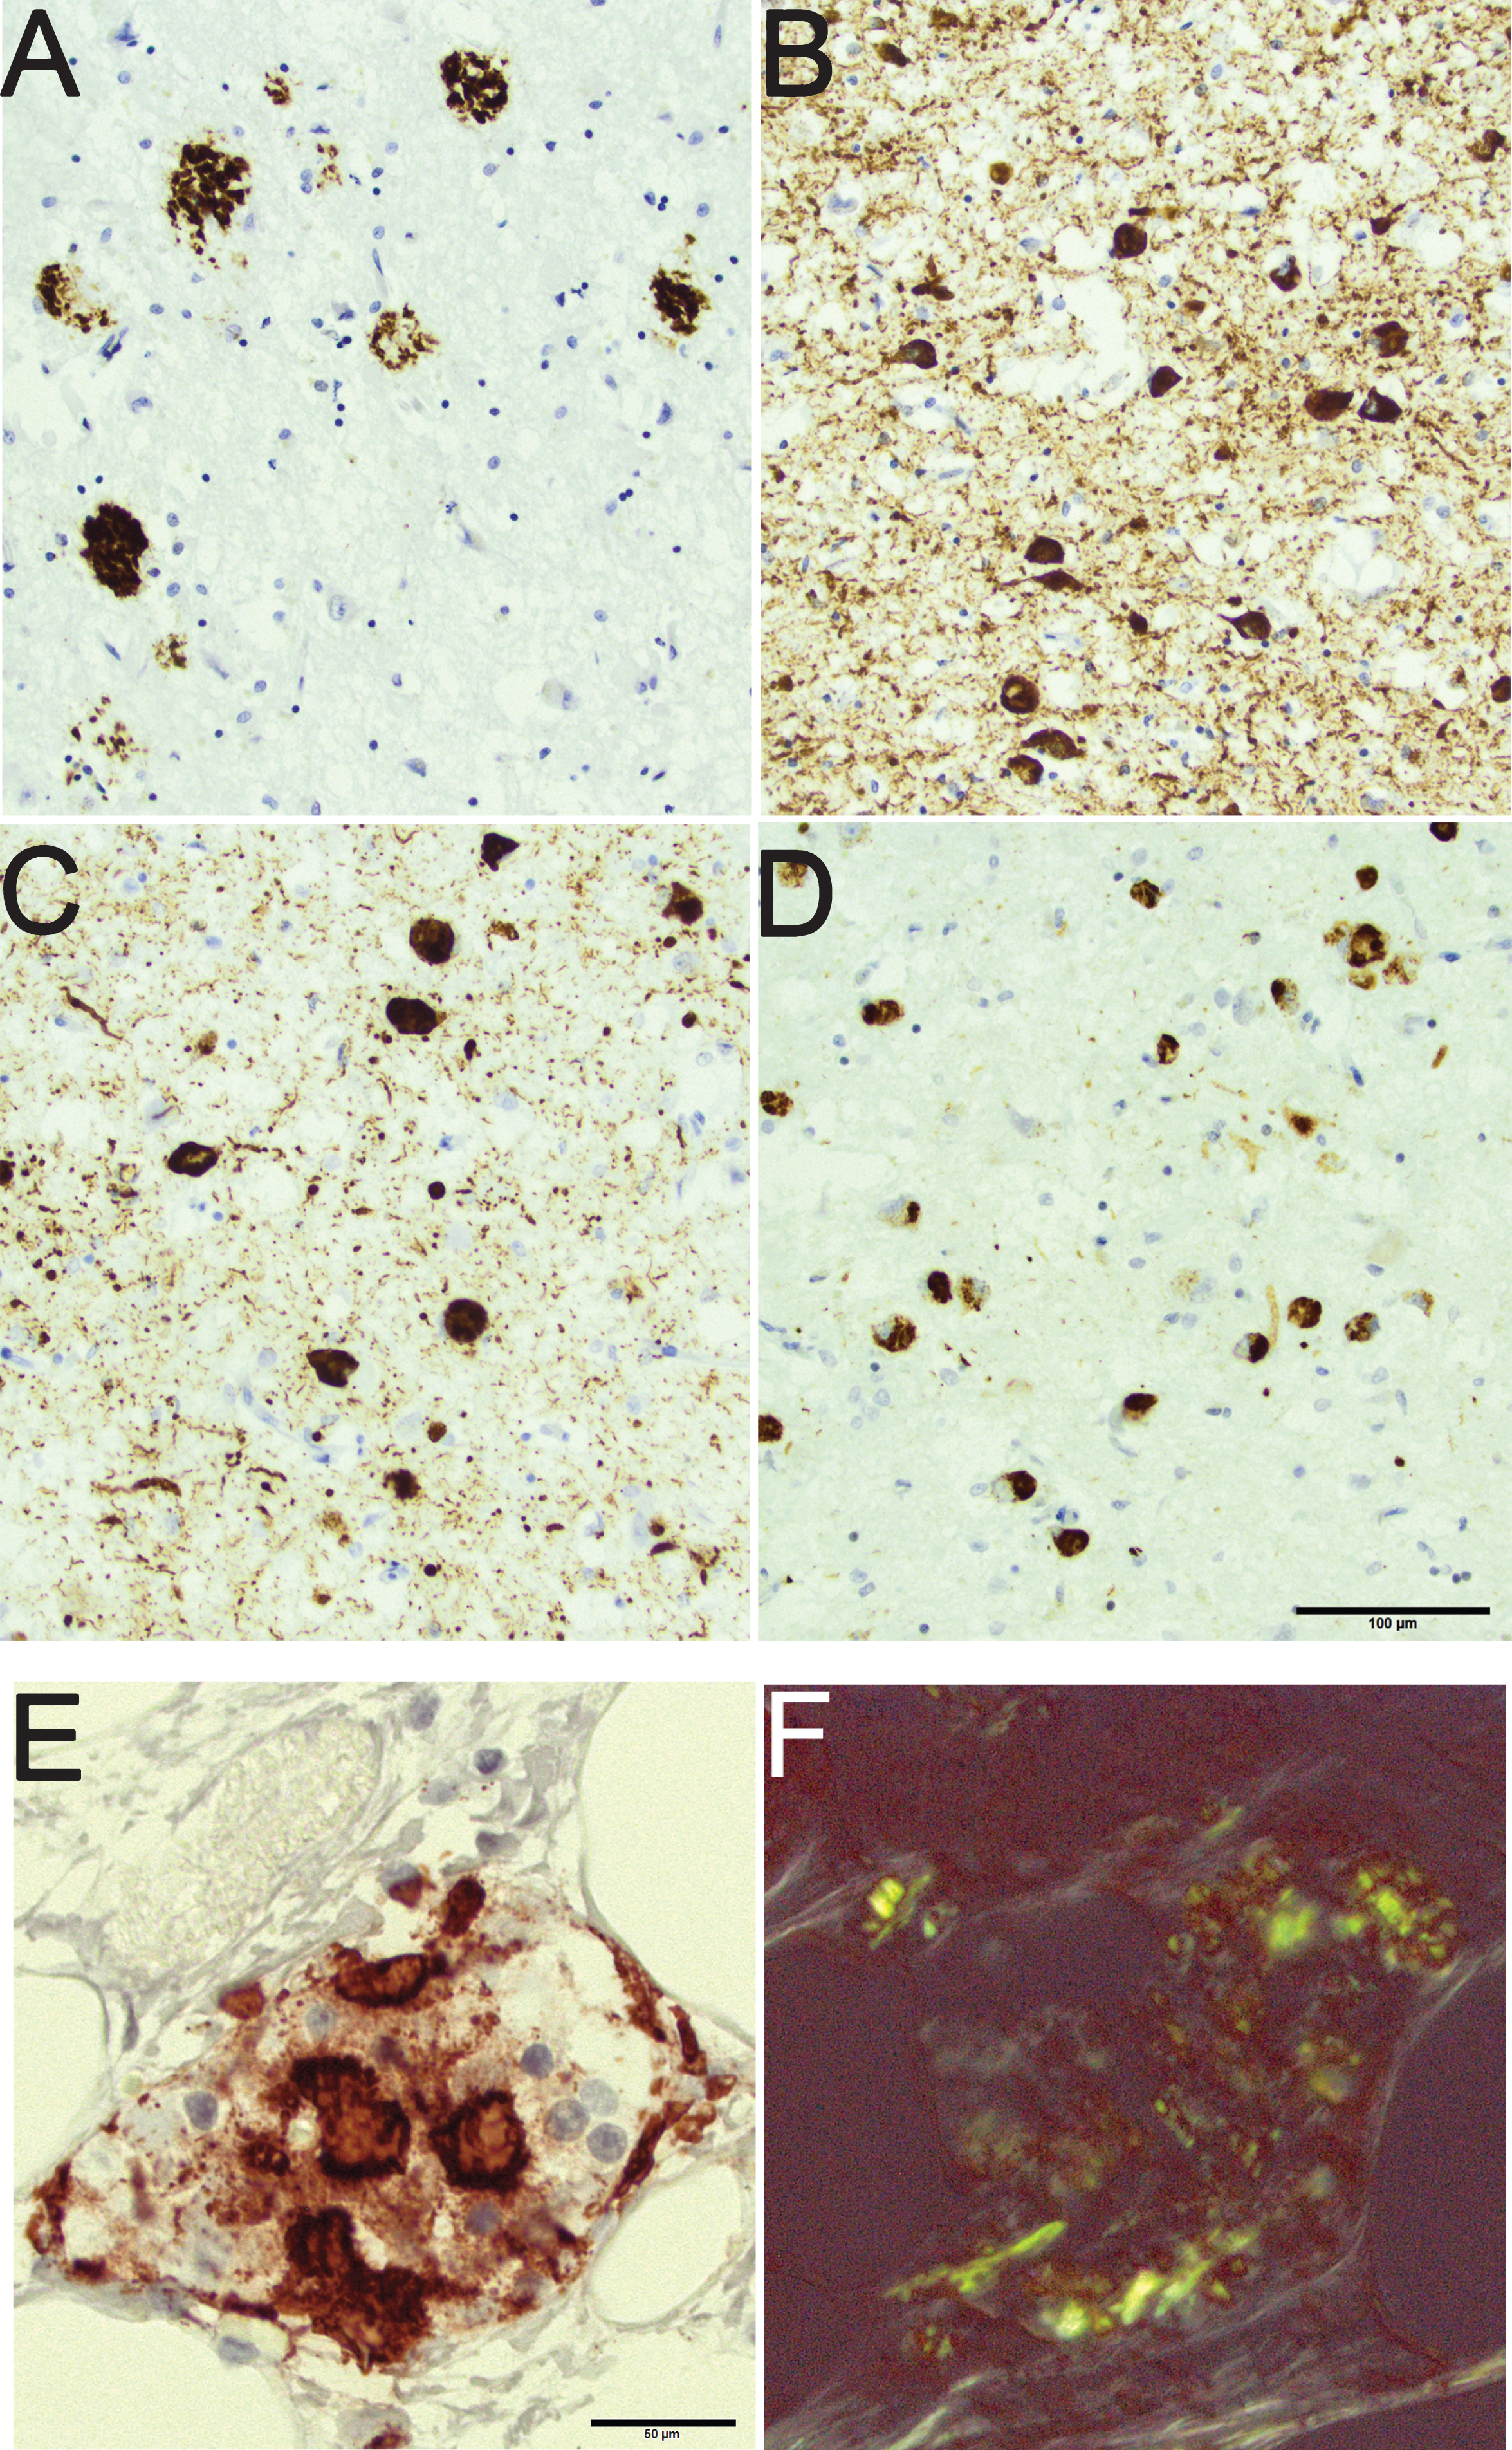 An 80-year-old male with a clinical diagnosis of Alzheimer’s disease with mixed pathology seen in the amygdala. Note the rounded amyloid-β labeled aggregates in the brain parenchyma (A), the hyperphosphorylated-τ labeled neurites and intraneuronal tangles (B), the α-synuclein labeled neurites and intraneuronal Lewy bodies (C), and the phosphorylated transactive DNA binding protein 43 labeled cytoplasmic inclusions (D). Pancreas tissue from an 85-year-old female with diabetes mellitus and signs of depression. Note the protein aggregates in an islet of Langerhans labeled with antibody directed to islet amyloid polypeptide (E). The same islet of Langerhans seen in Congo stain (F); note the birefringence of the protein. Scale bar: 100 μm in A-D and 50 μm in E,F.